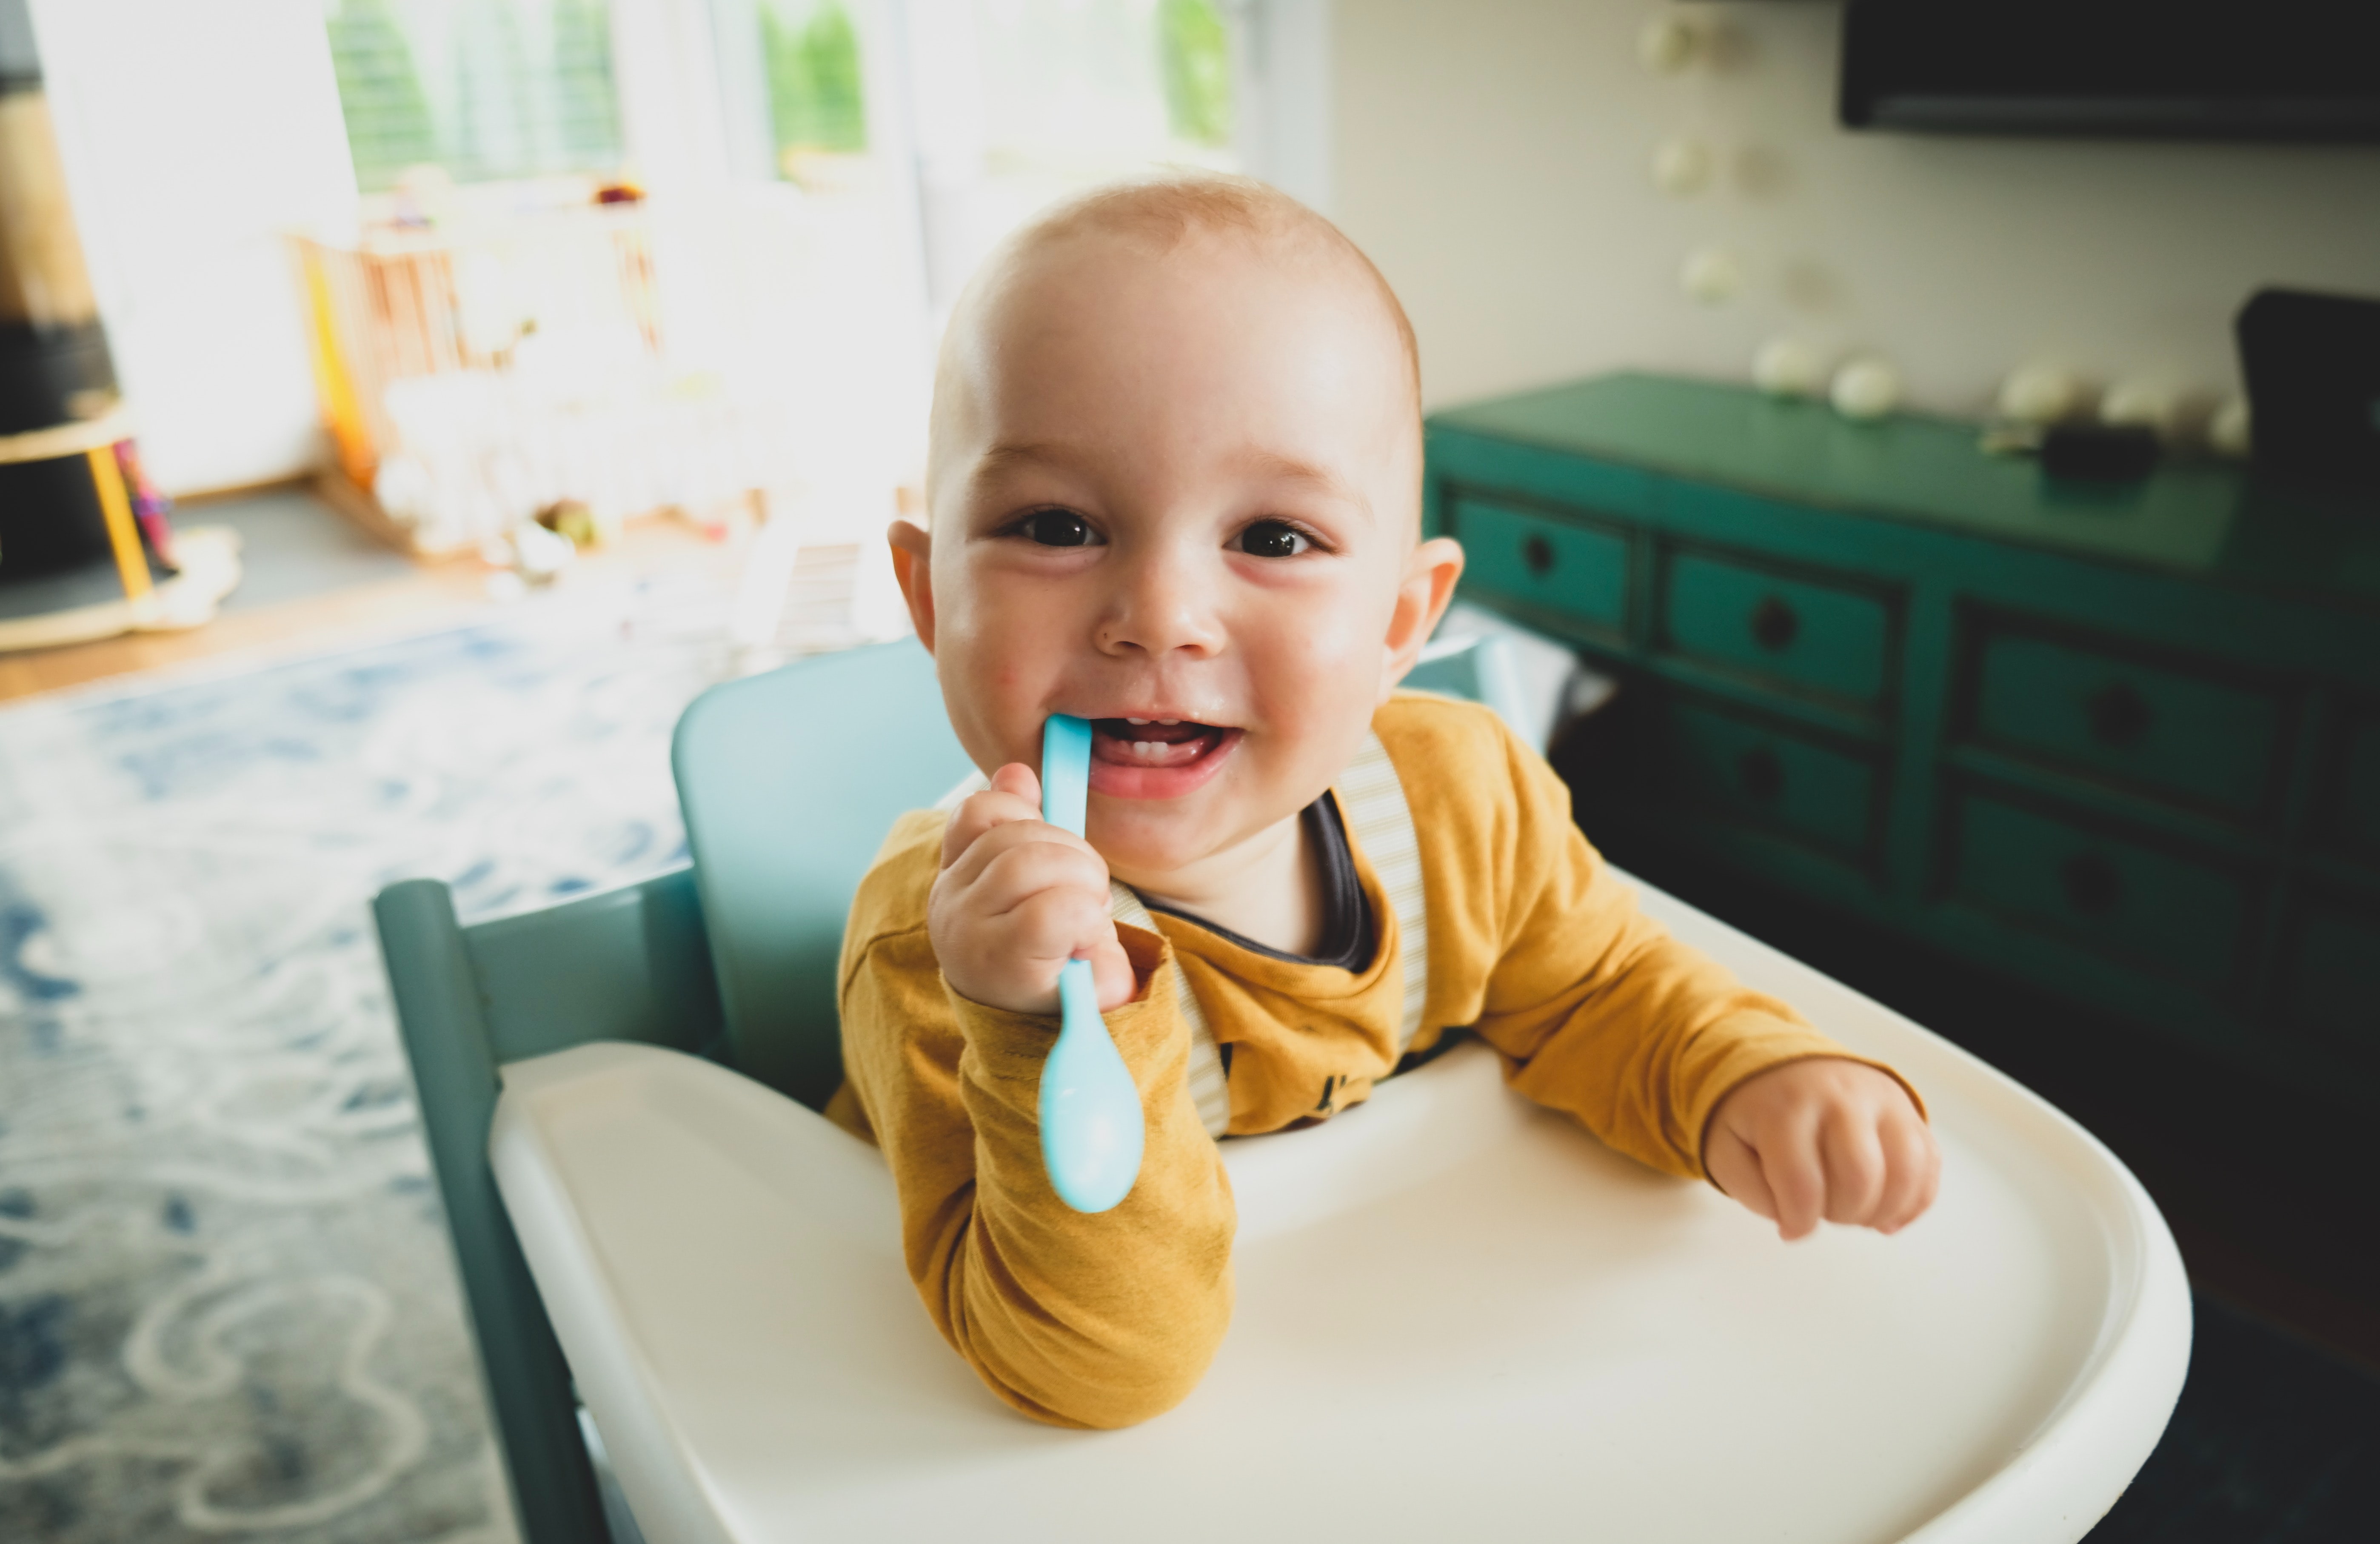 toddler sat in a high-chair smiling and biting on a plastic spoon